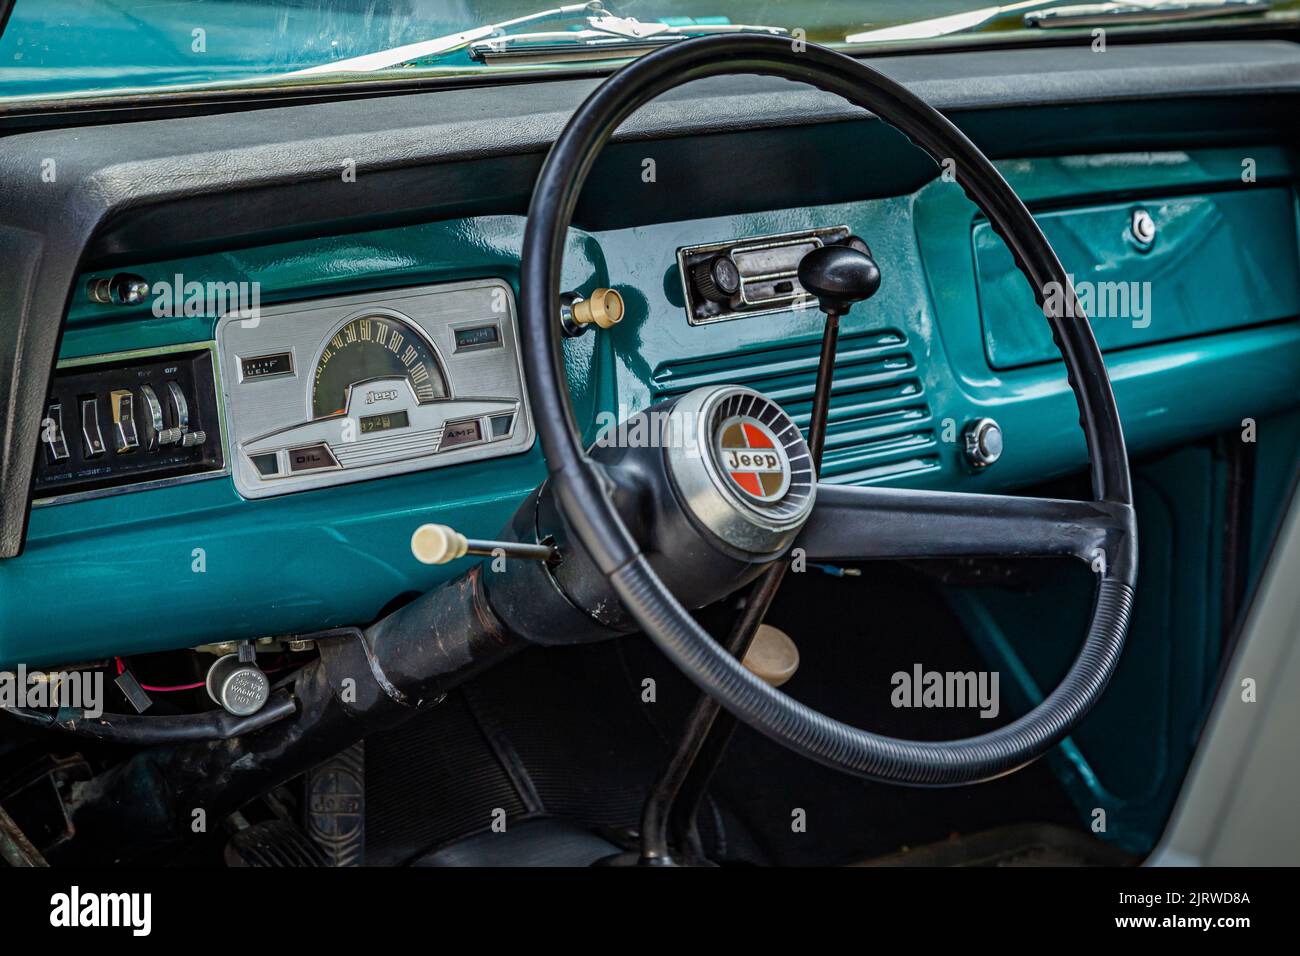 Pigeon Forge, TN - August 25, 2017: Interior detail view of a Kaiser Jeep Jeepster Commando Station Wagon at a local enthusiast rally. Stock Photo